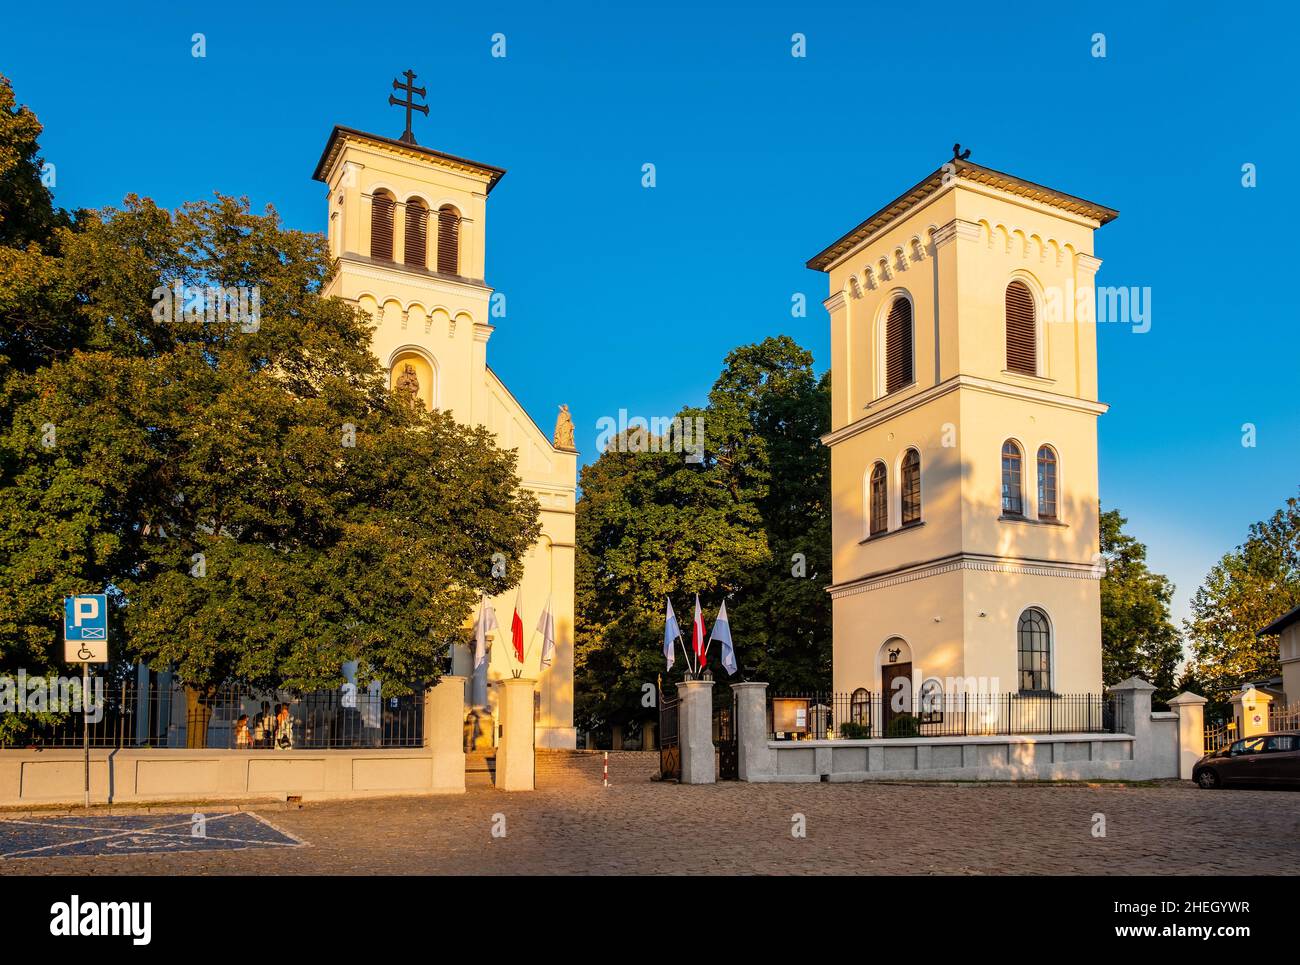 Warsaw, Poland - May 22, 2020: Neo-roman St. Catherine church and bell tower at Dolina Sluzewiecka street in Ursynow district of Warsaw Stock Photo